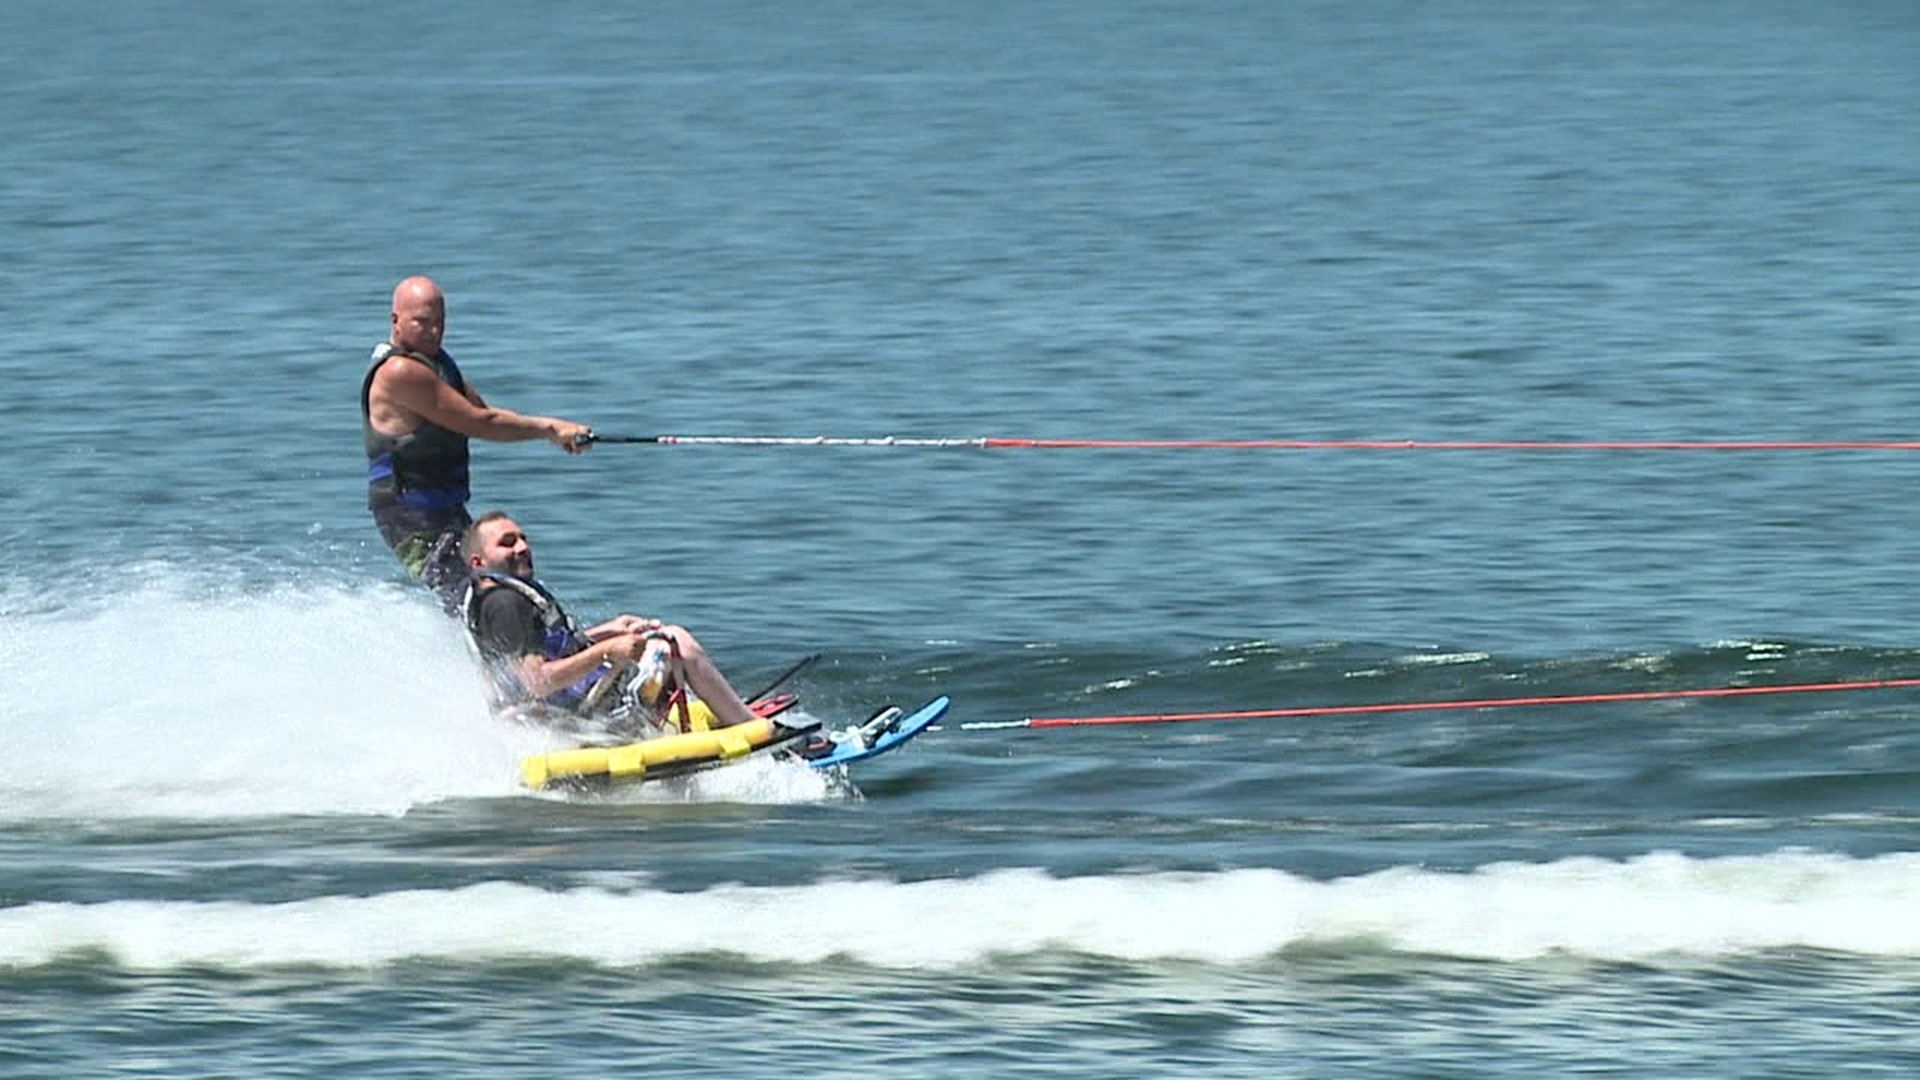 A non-profit in our area is making sure everyone, no matter their ability, has the chance to experience the joy of water sports.